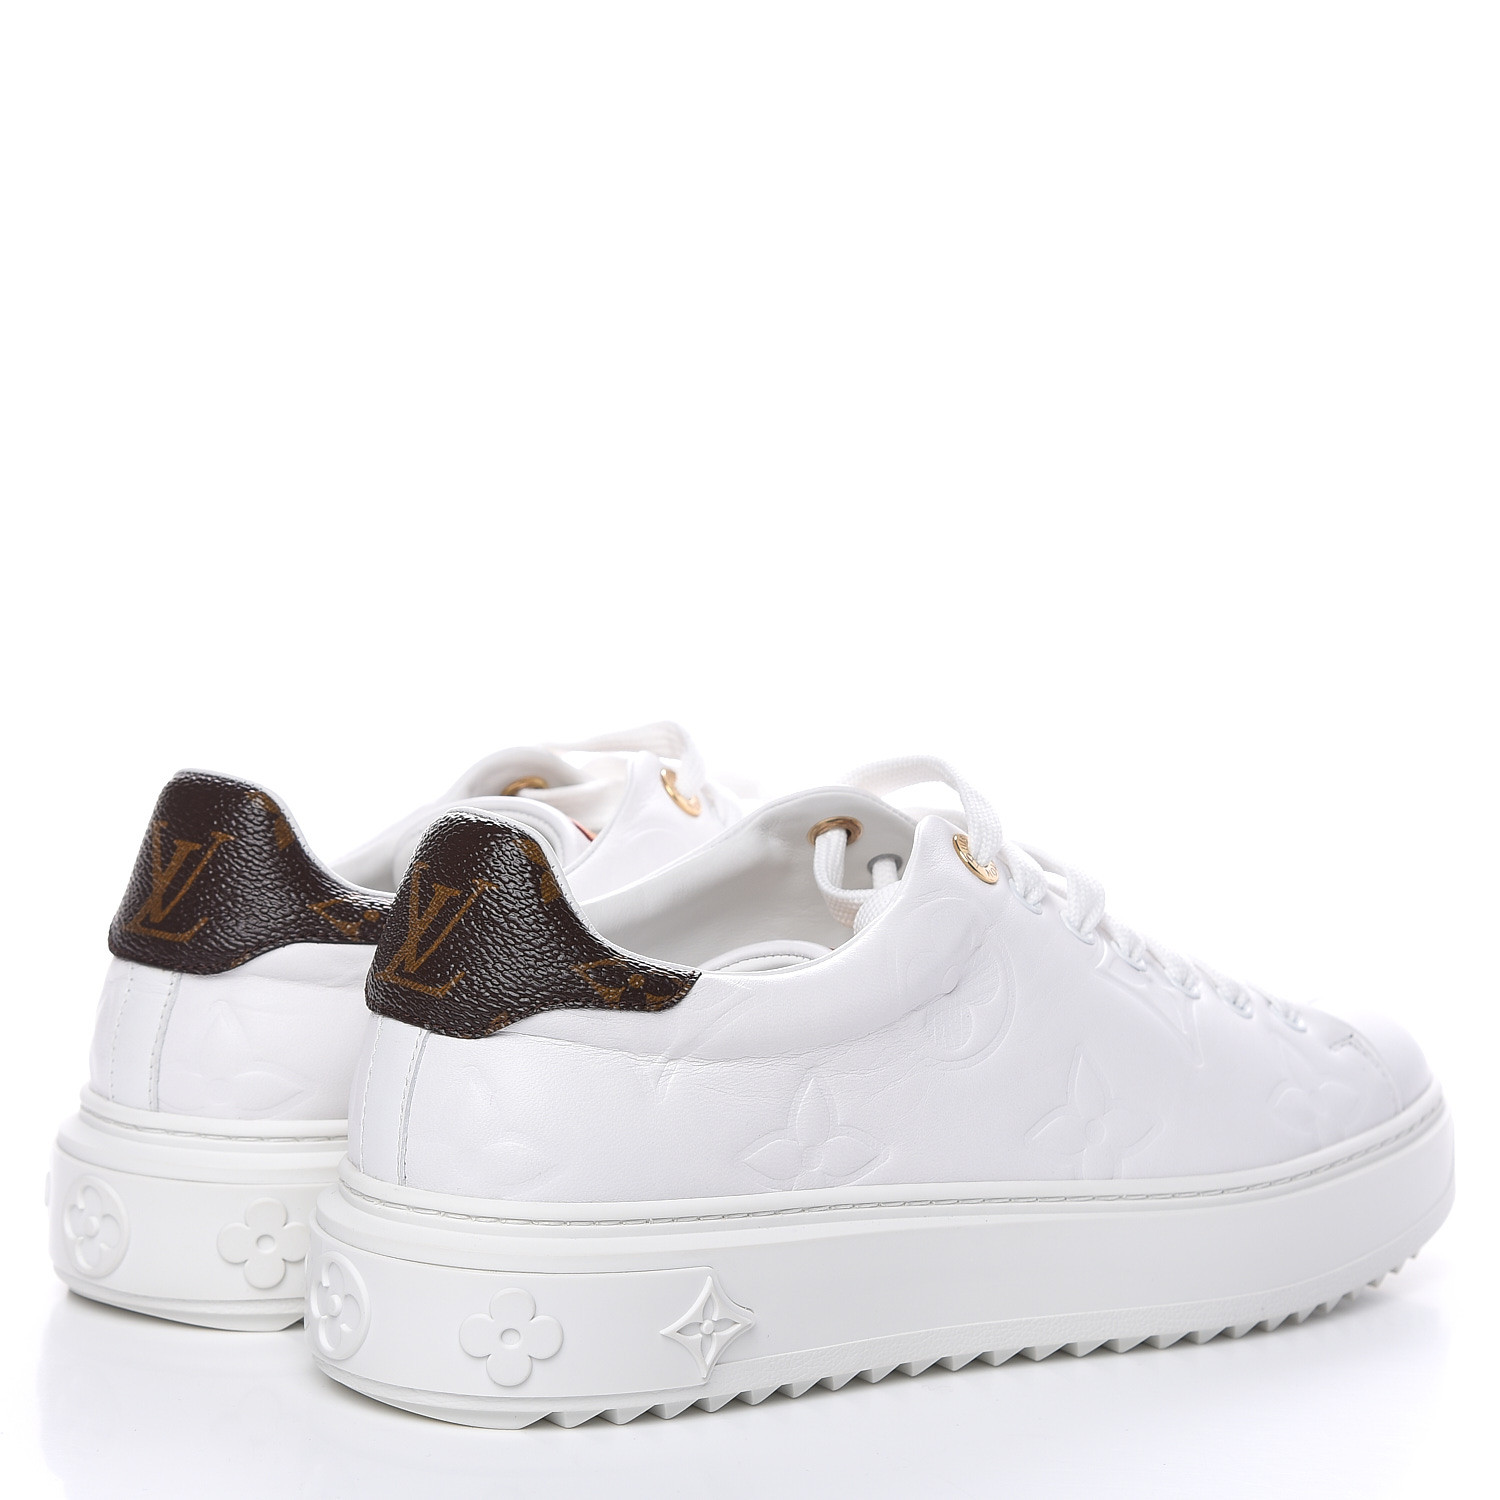 Buy > louis vuitton time out sneakers white > in stock